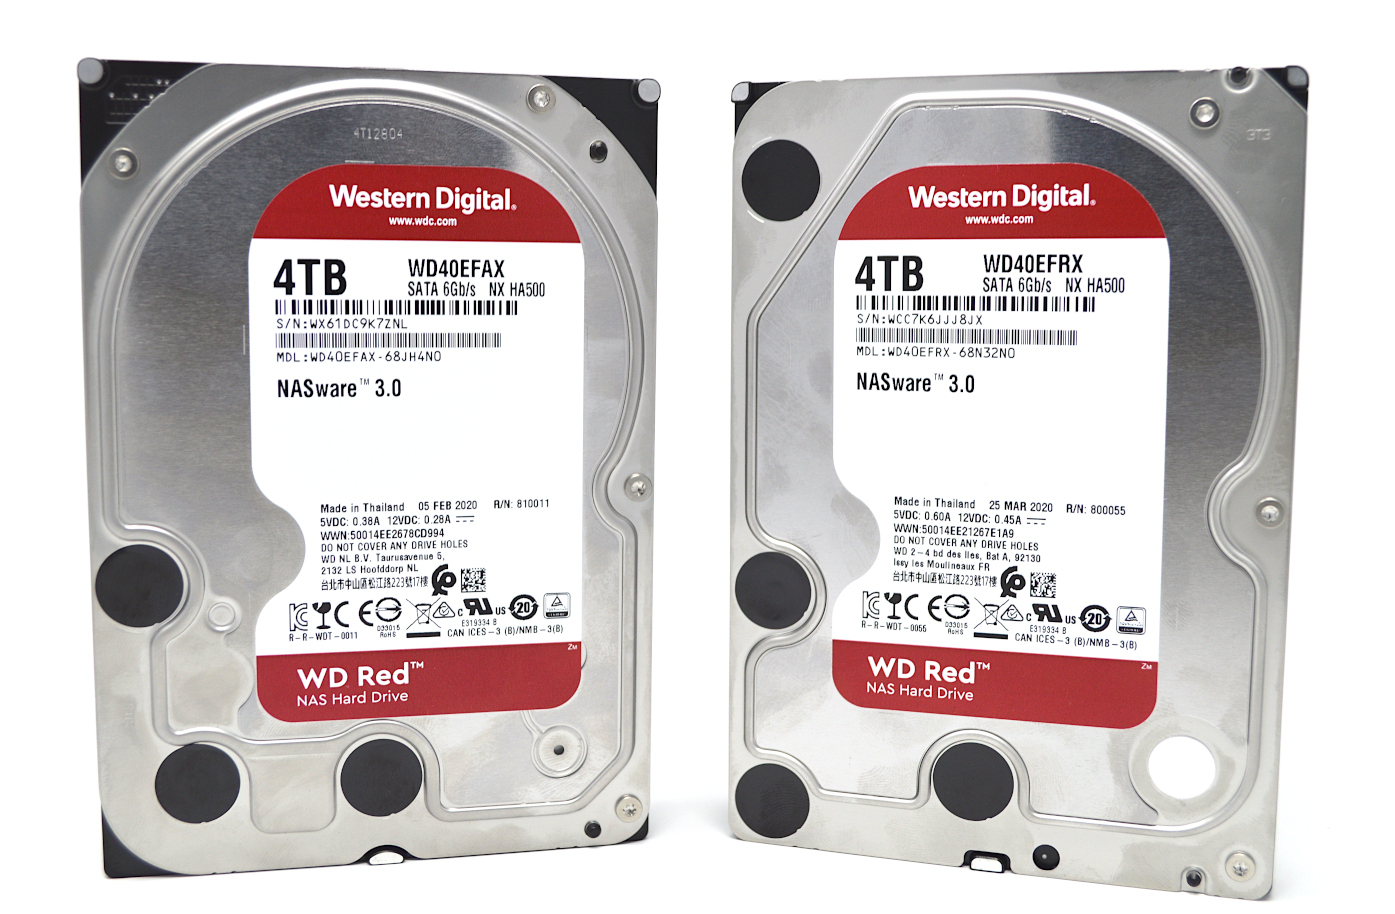 Western Digital adds “Red Plus” branding for non-SMR hard drives